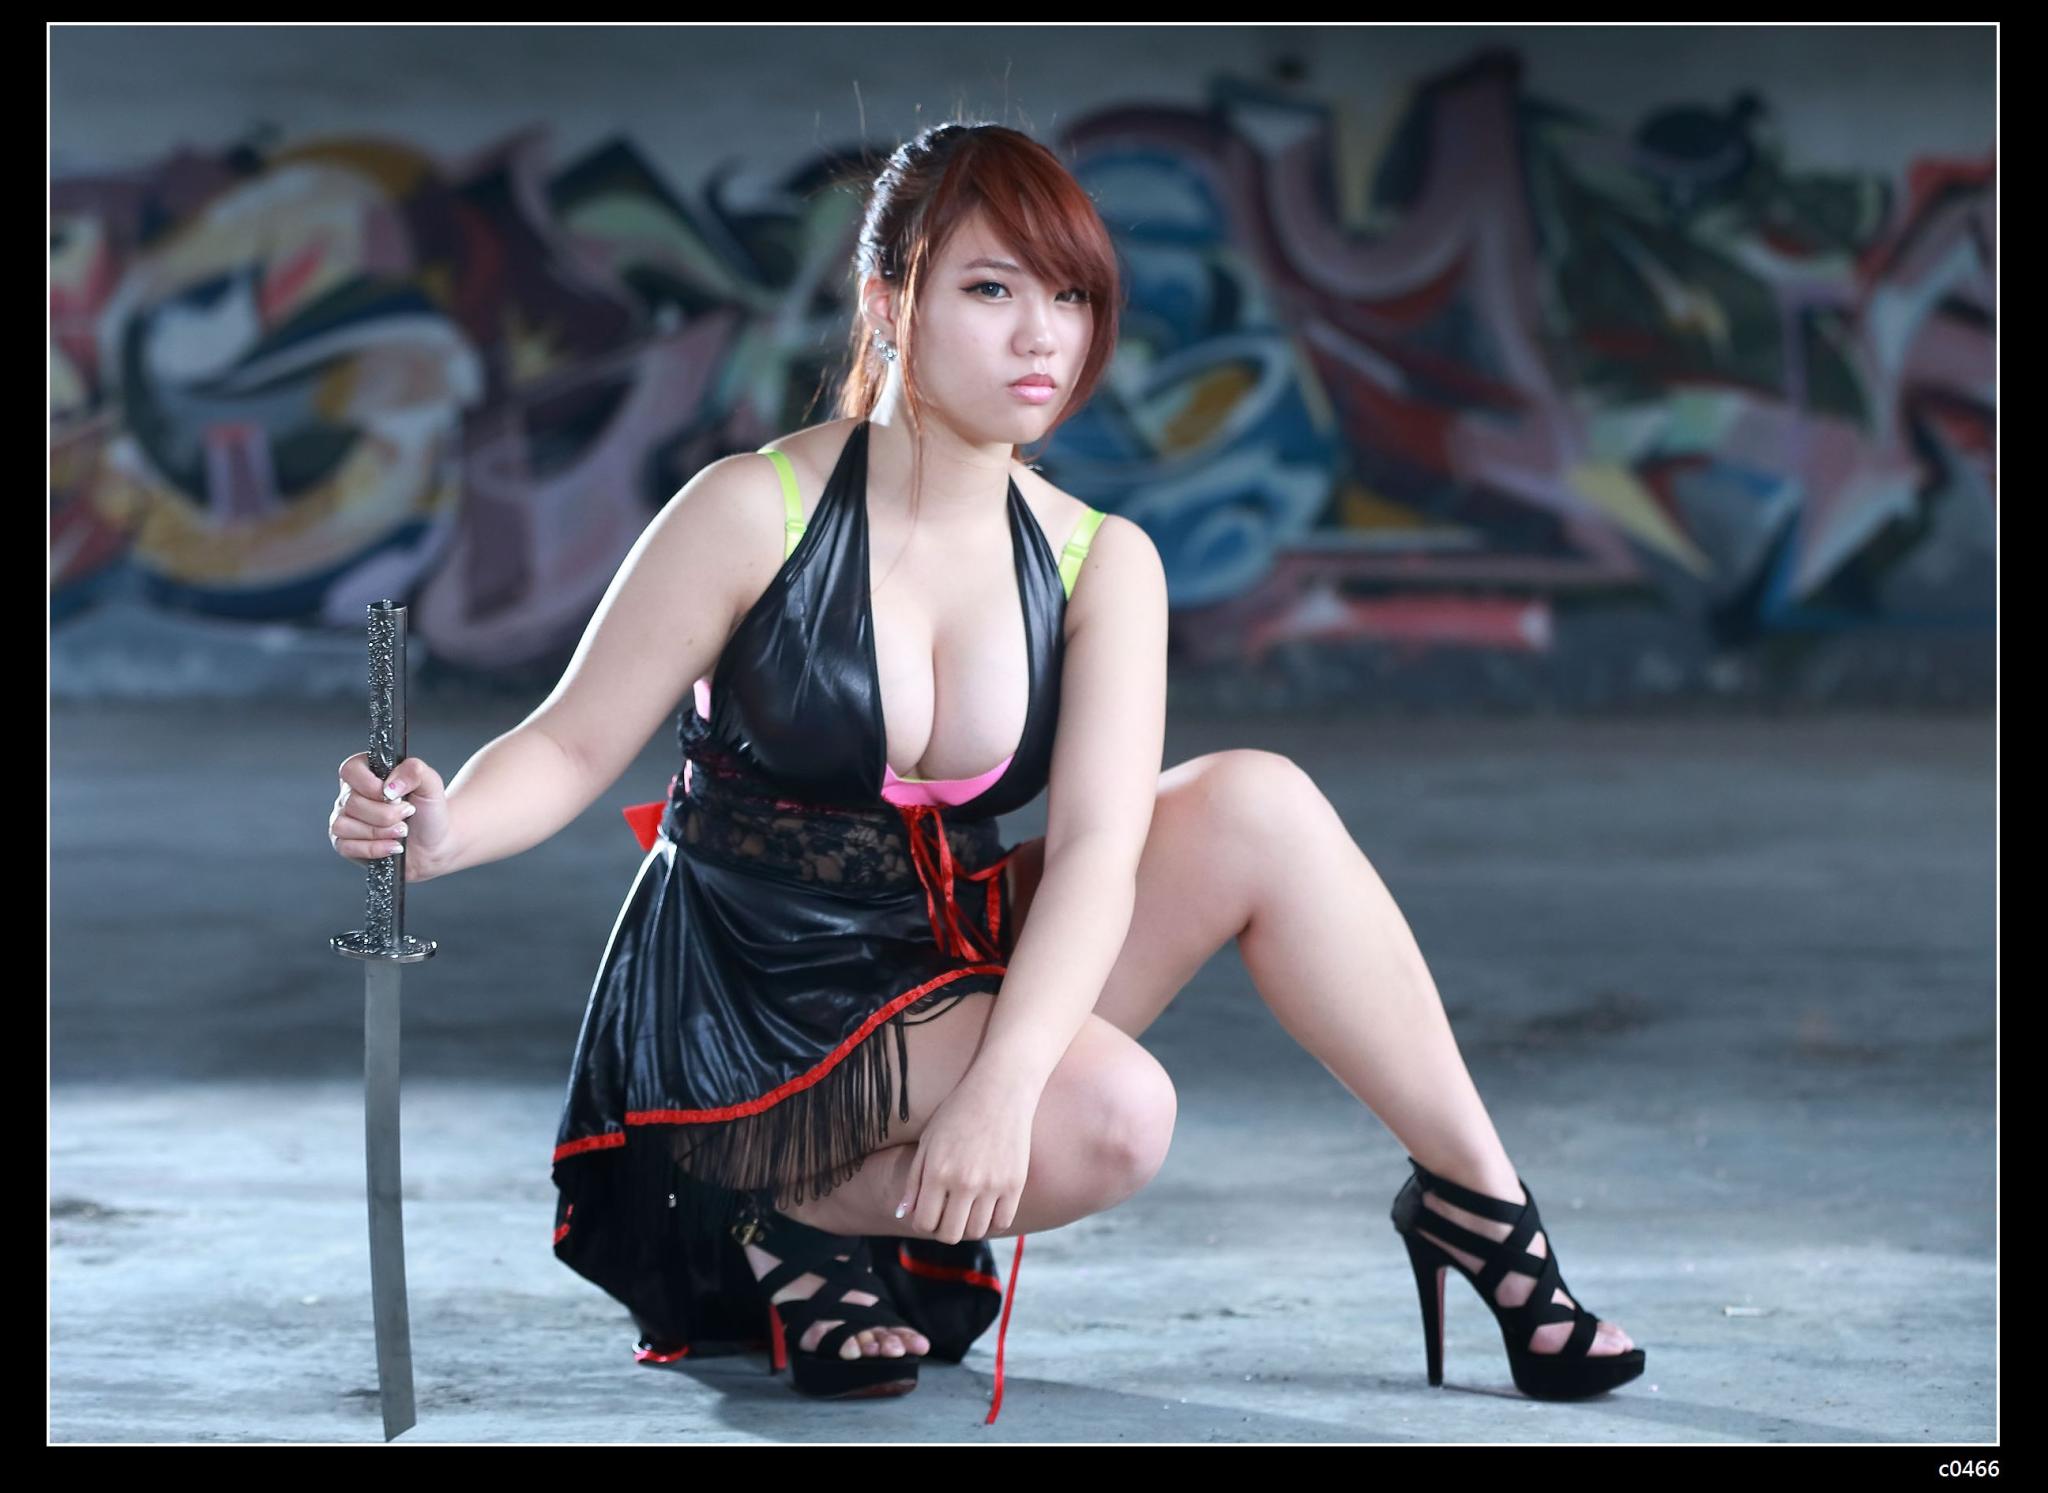 The girl with the katana in the leather dress